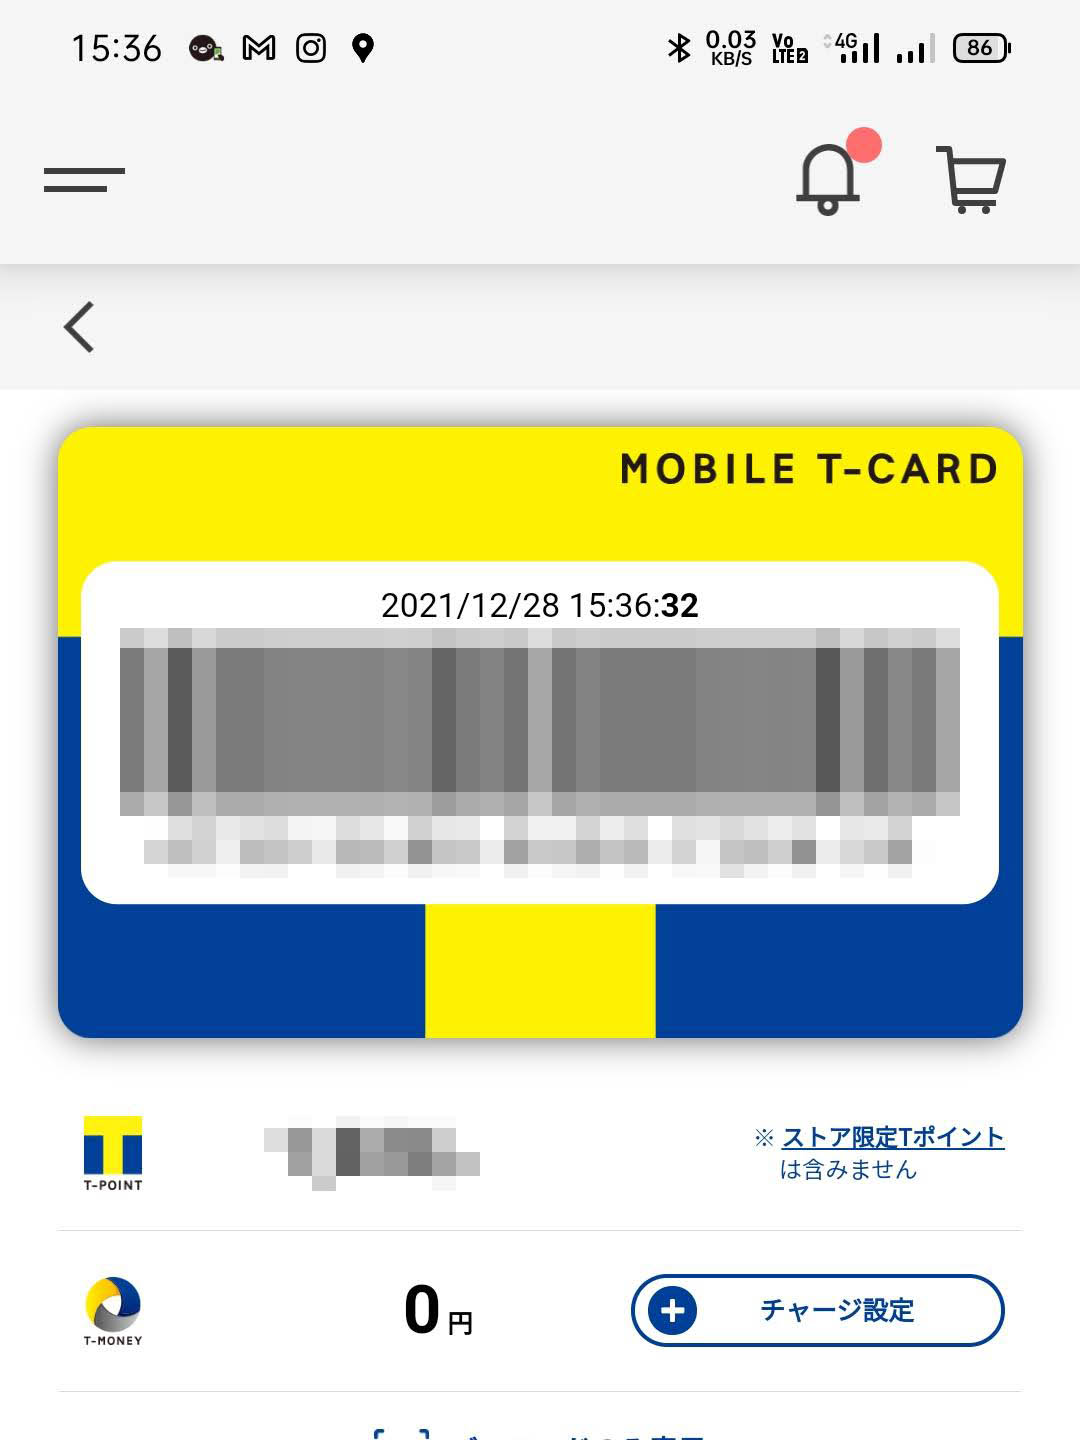 MOBILE T-CARD